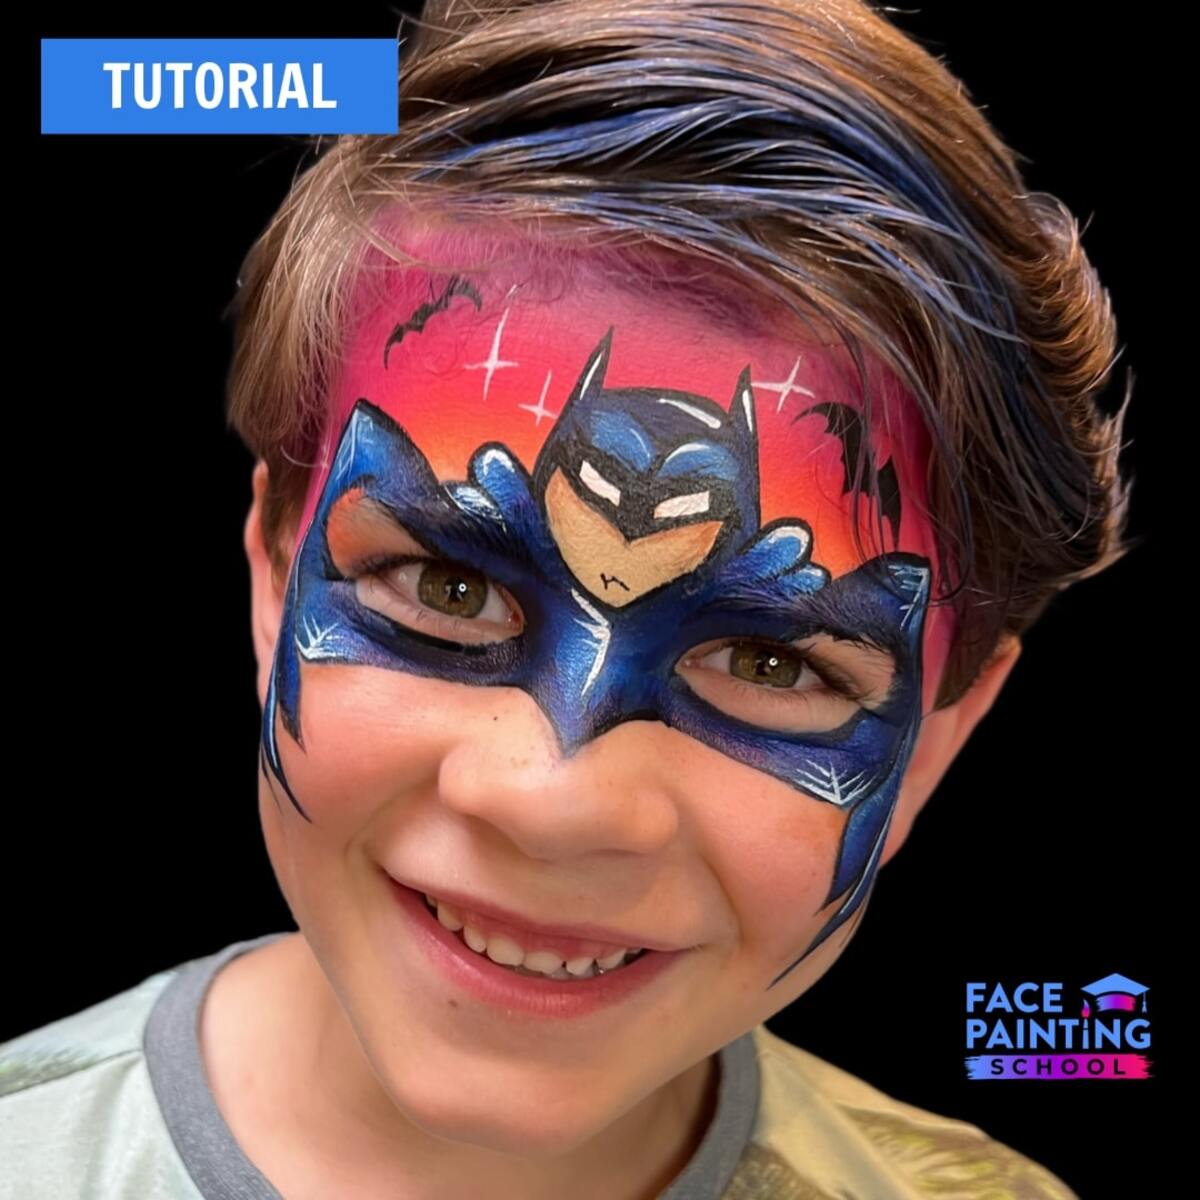 How to Use Face Painting Sponges - Tutorial 